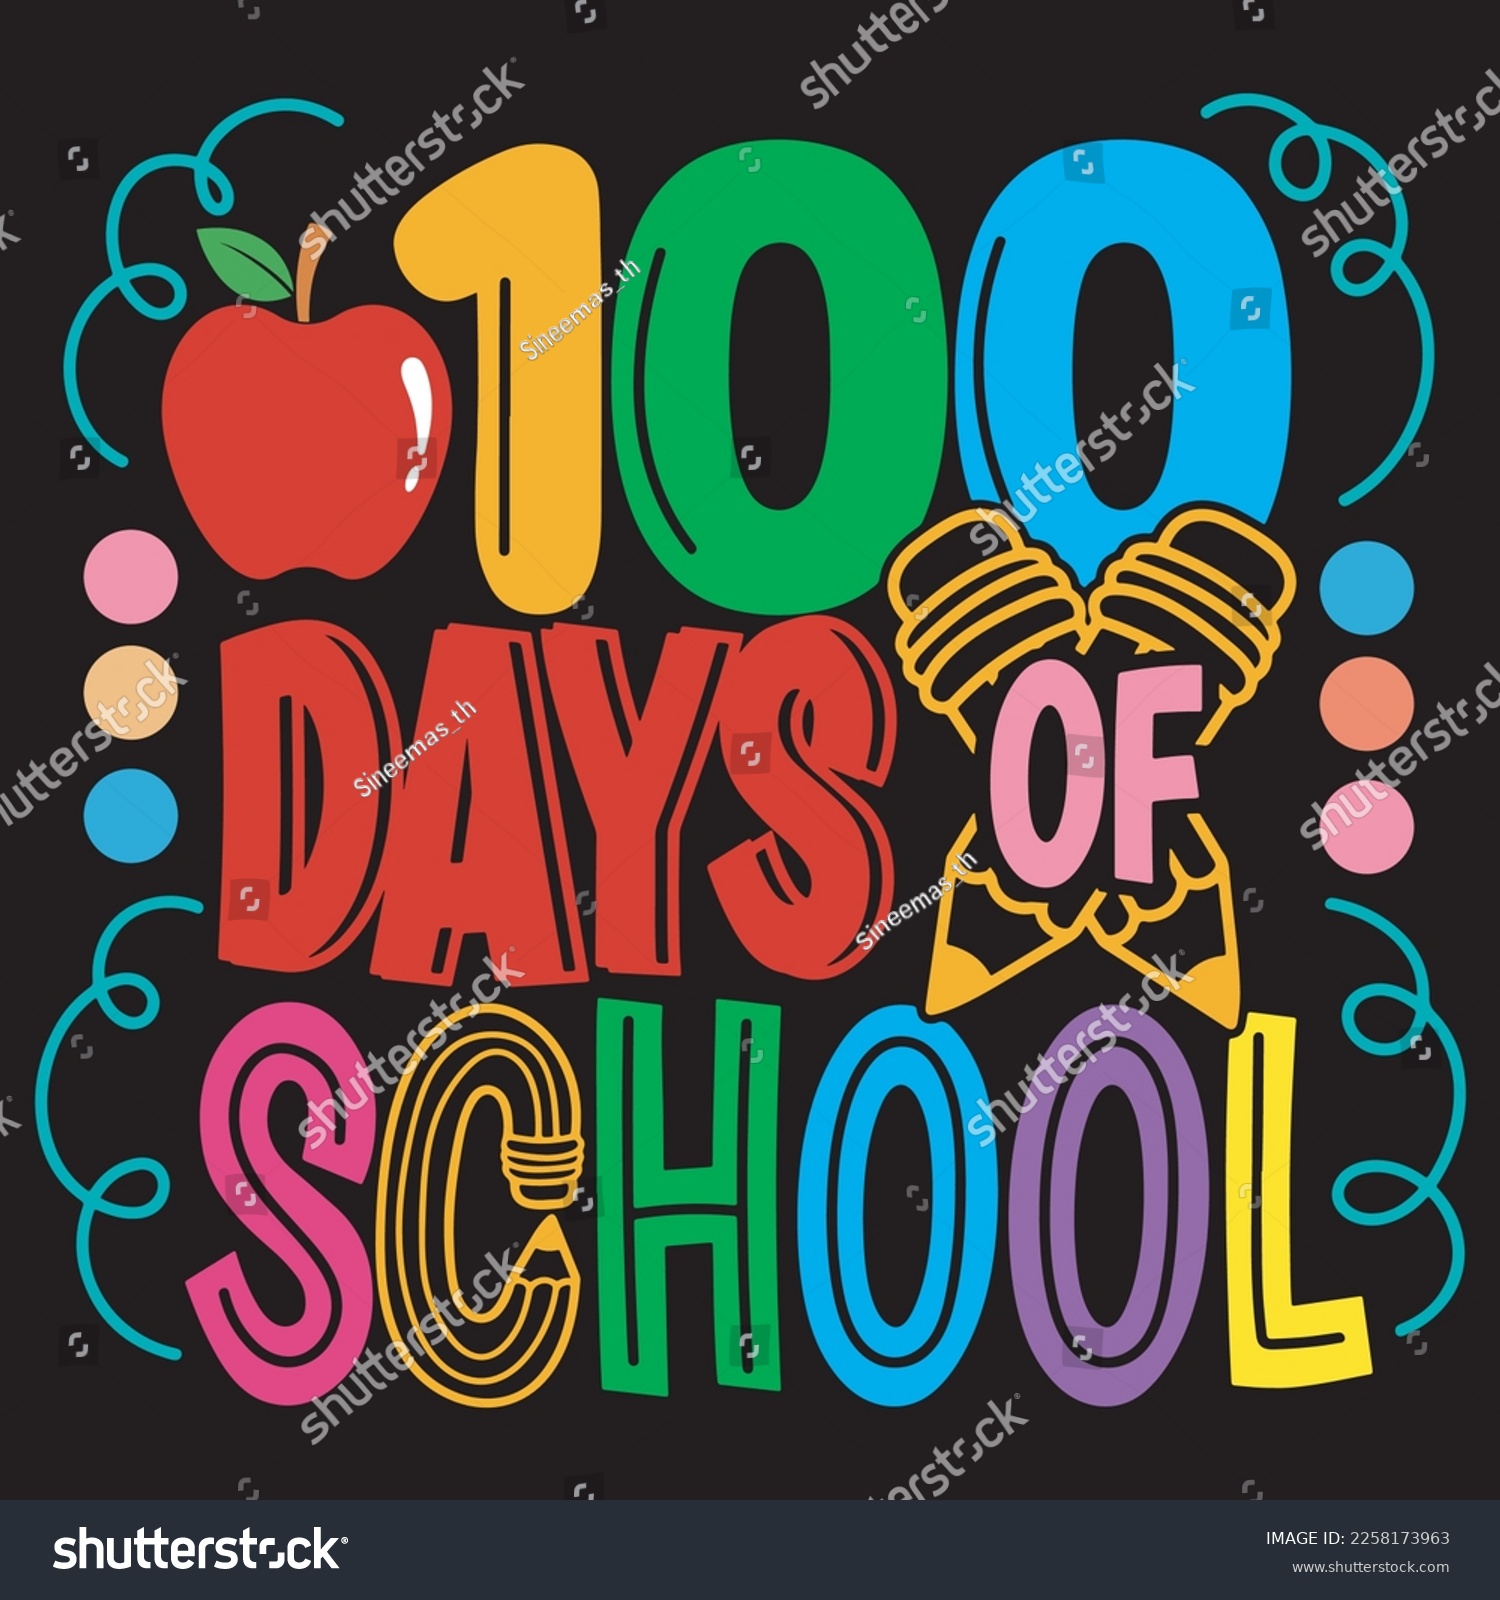 SVG of 100 days of school svg vector, Illustration isolated on black background,
100 Days Of School T-Shirt Design, Back to school cut file.
 svg